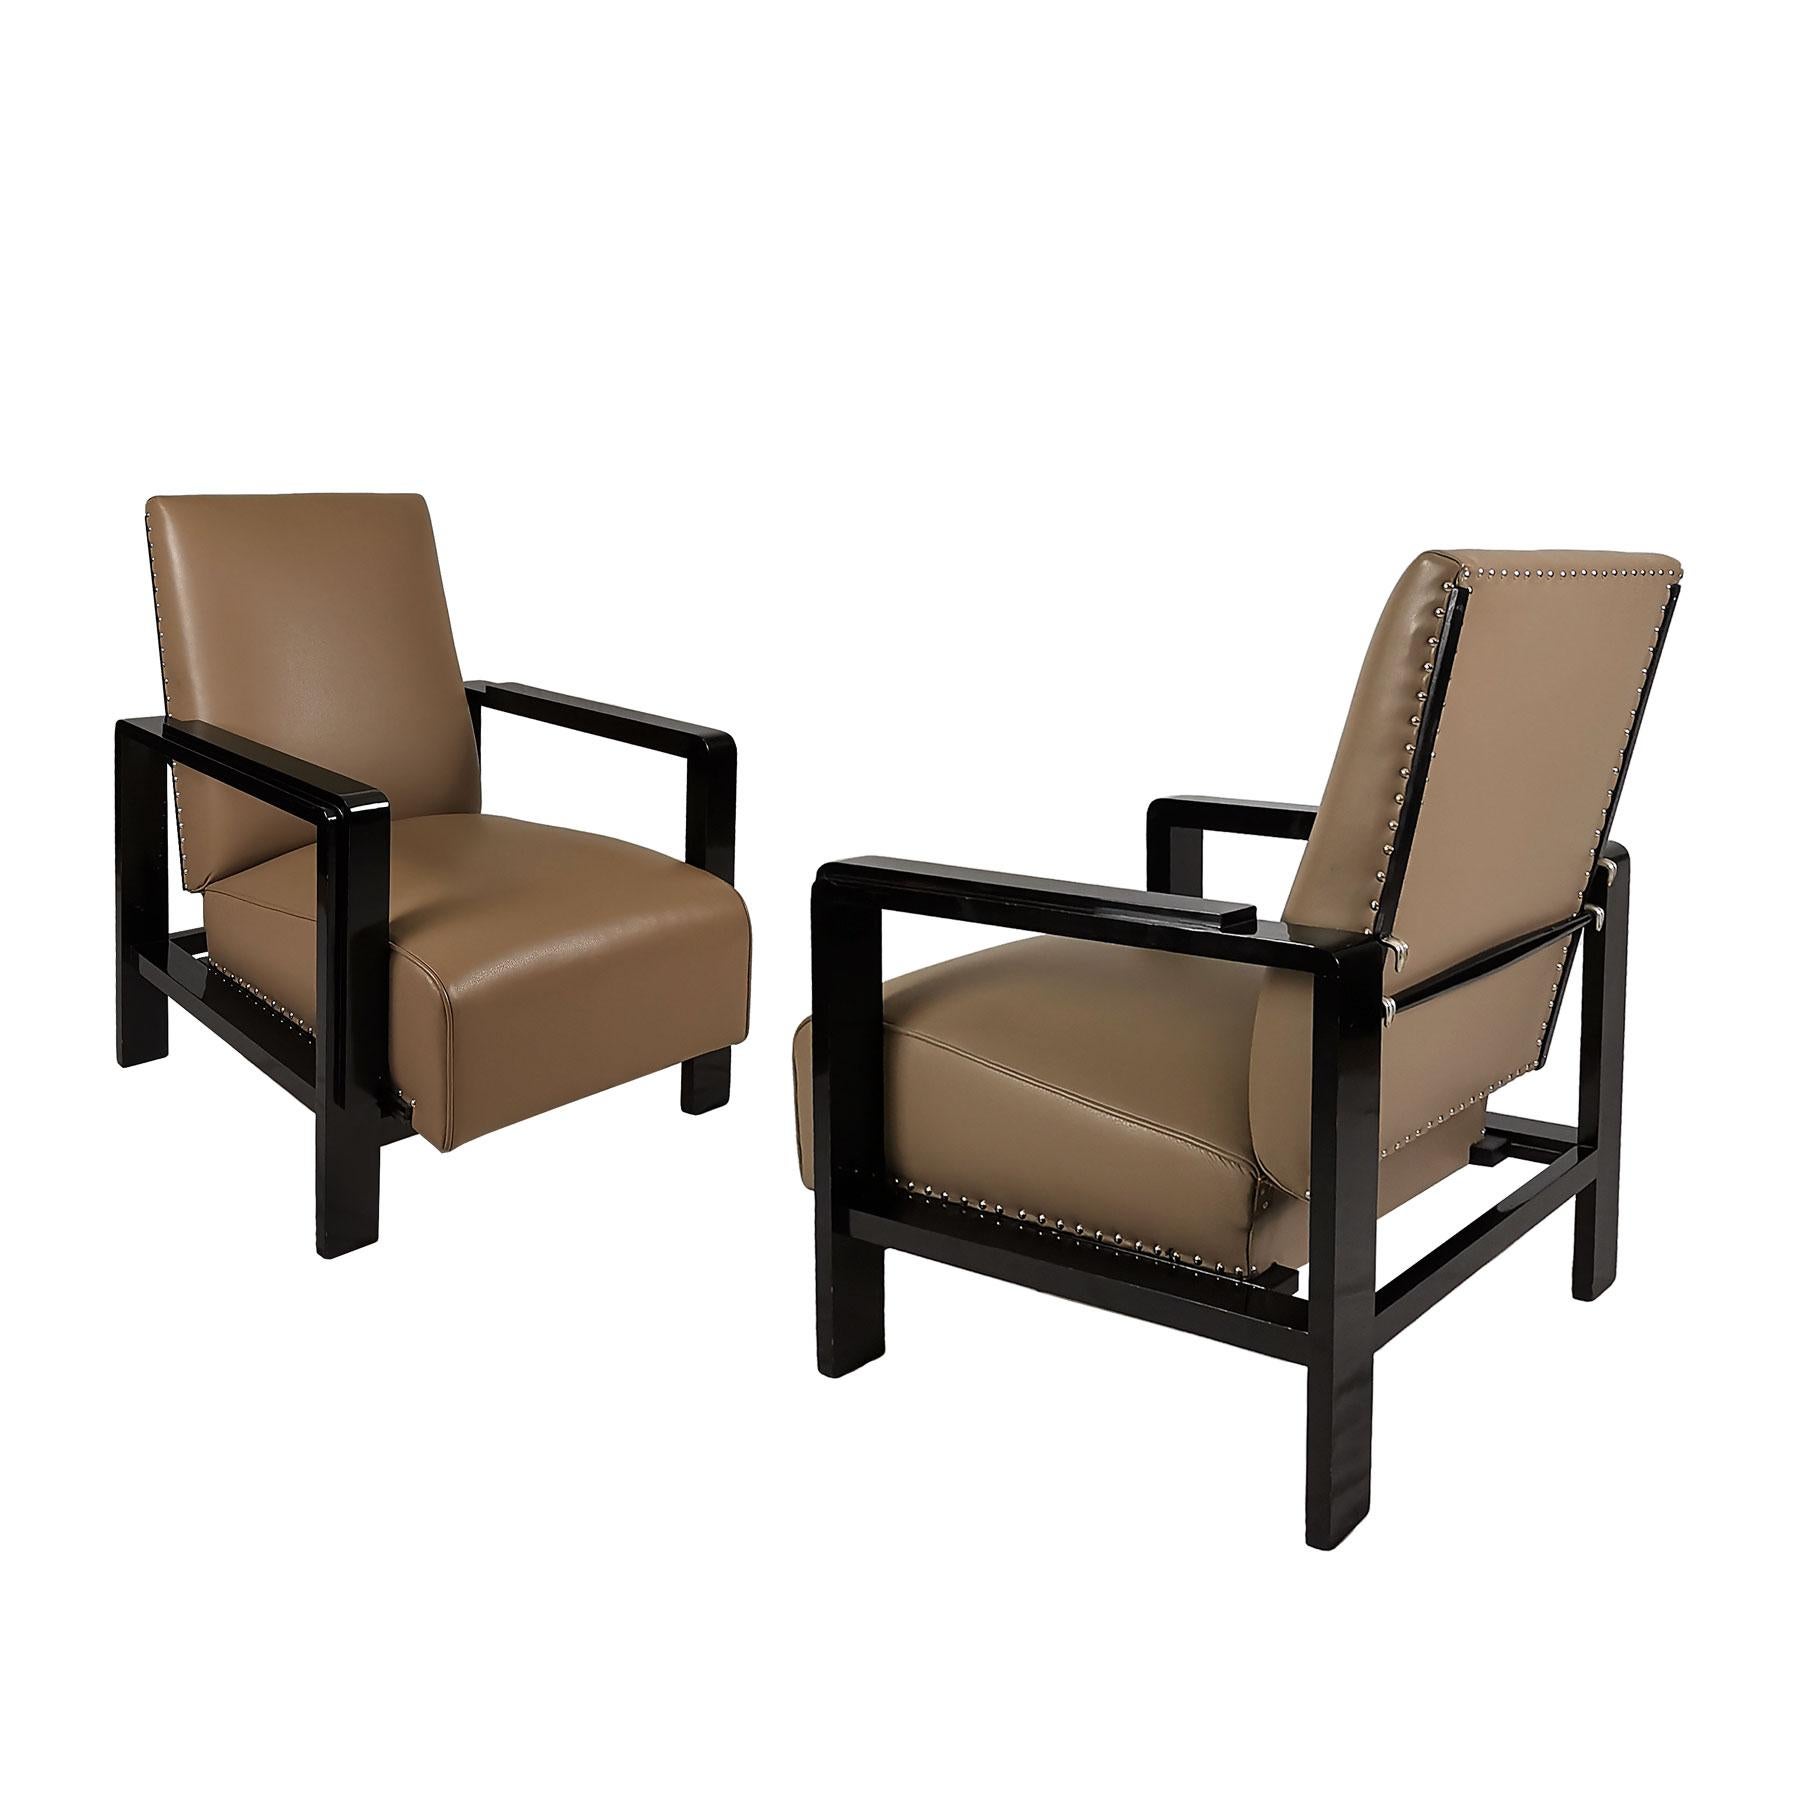 Pair of Art Deco cubist systems armchairs, French polished and dark varnished wood and mole leather.
Spain, 1930-1935
Measures: Extended depth 100 cm.